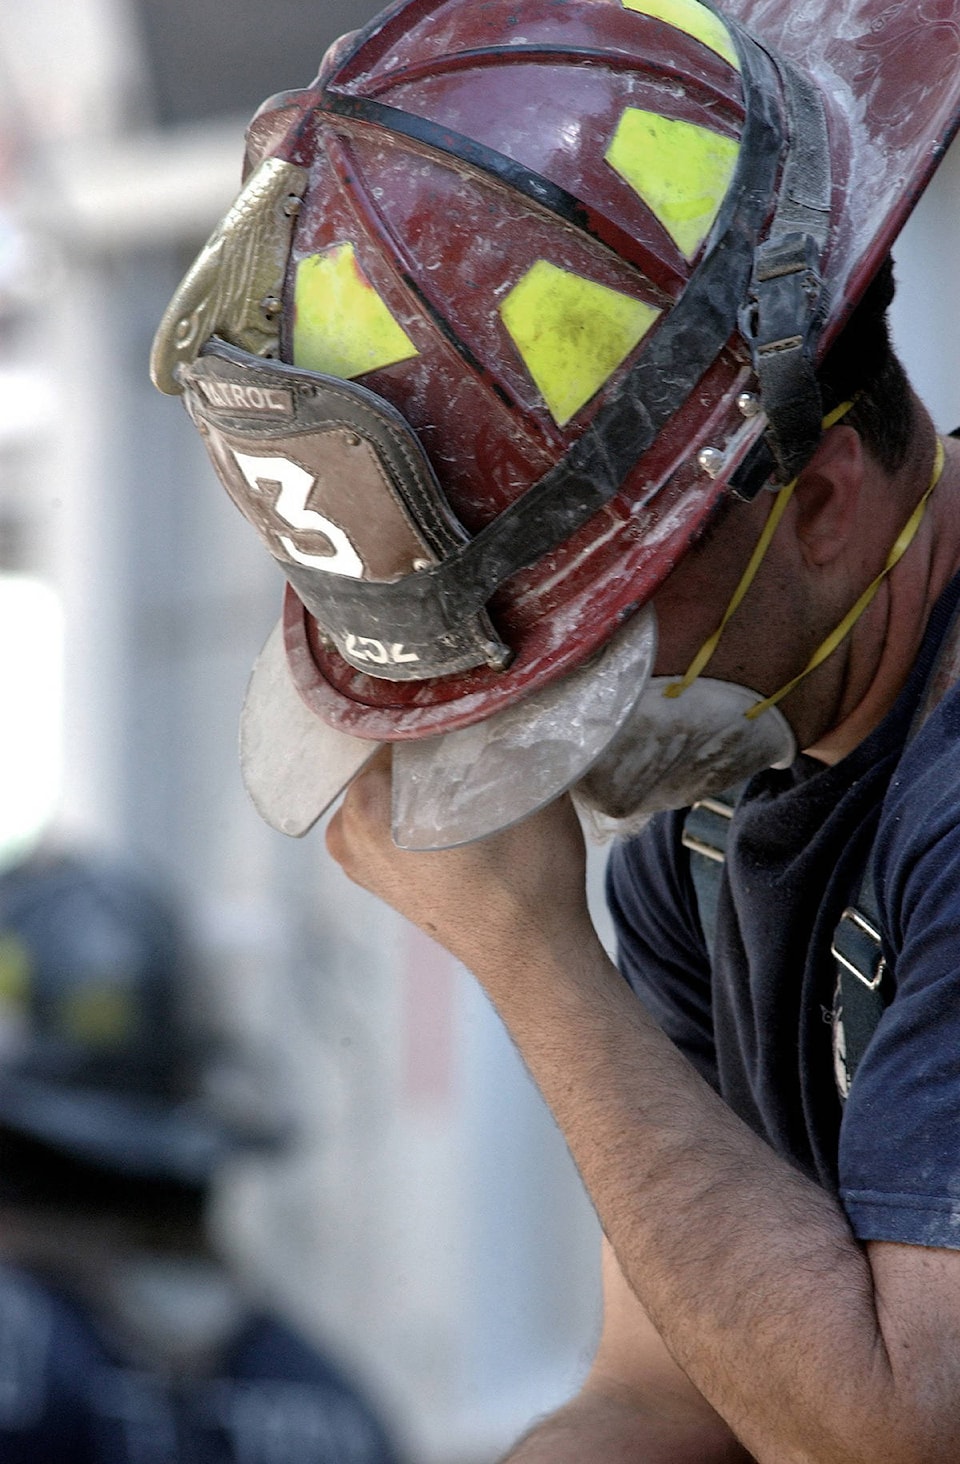 13495661_web1_180914-GNG-911firefighterStock